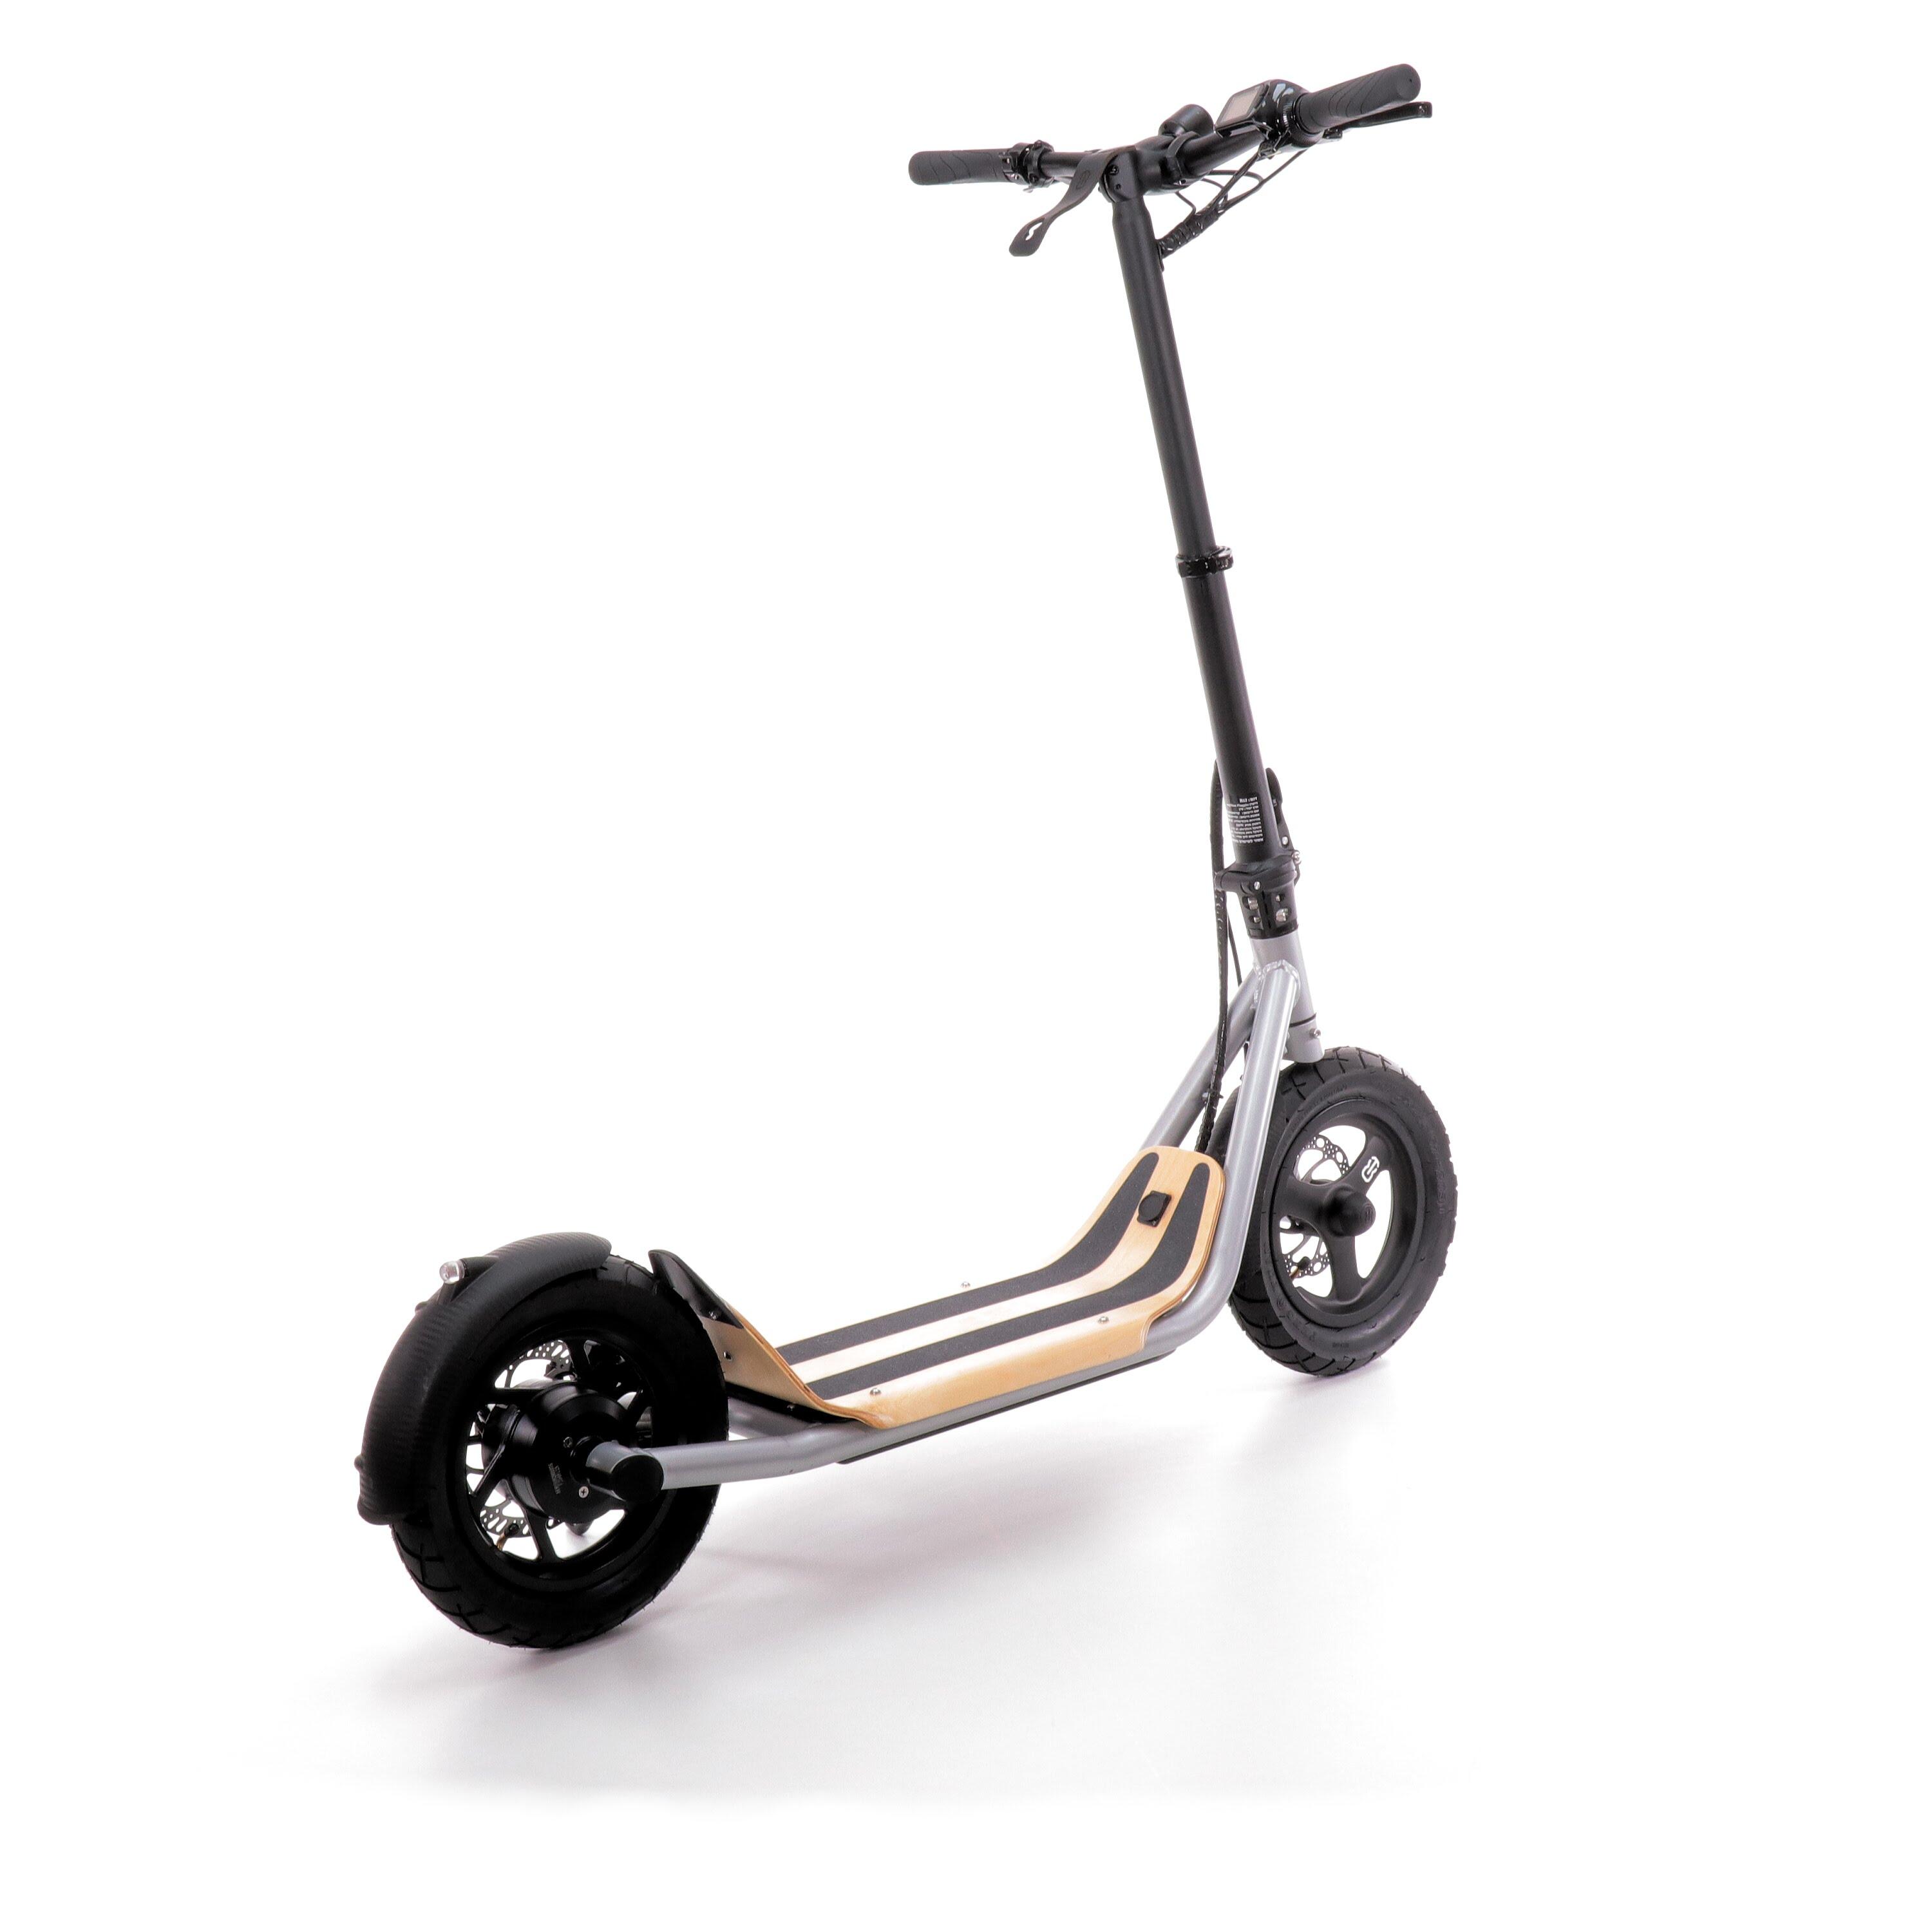 8Tev Adult Electric Scooter, B12 Classic, Silver 3/5